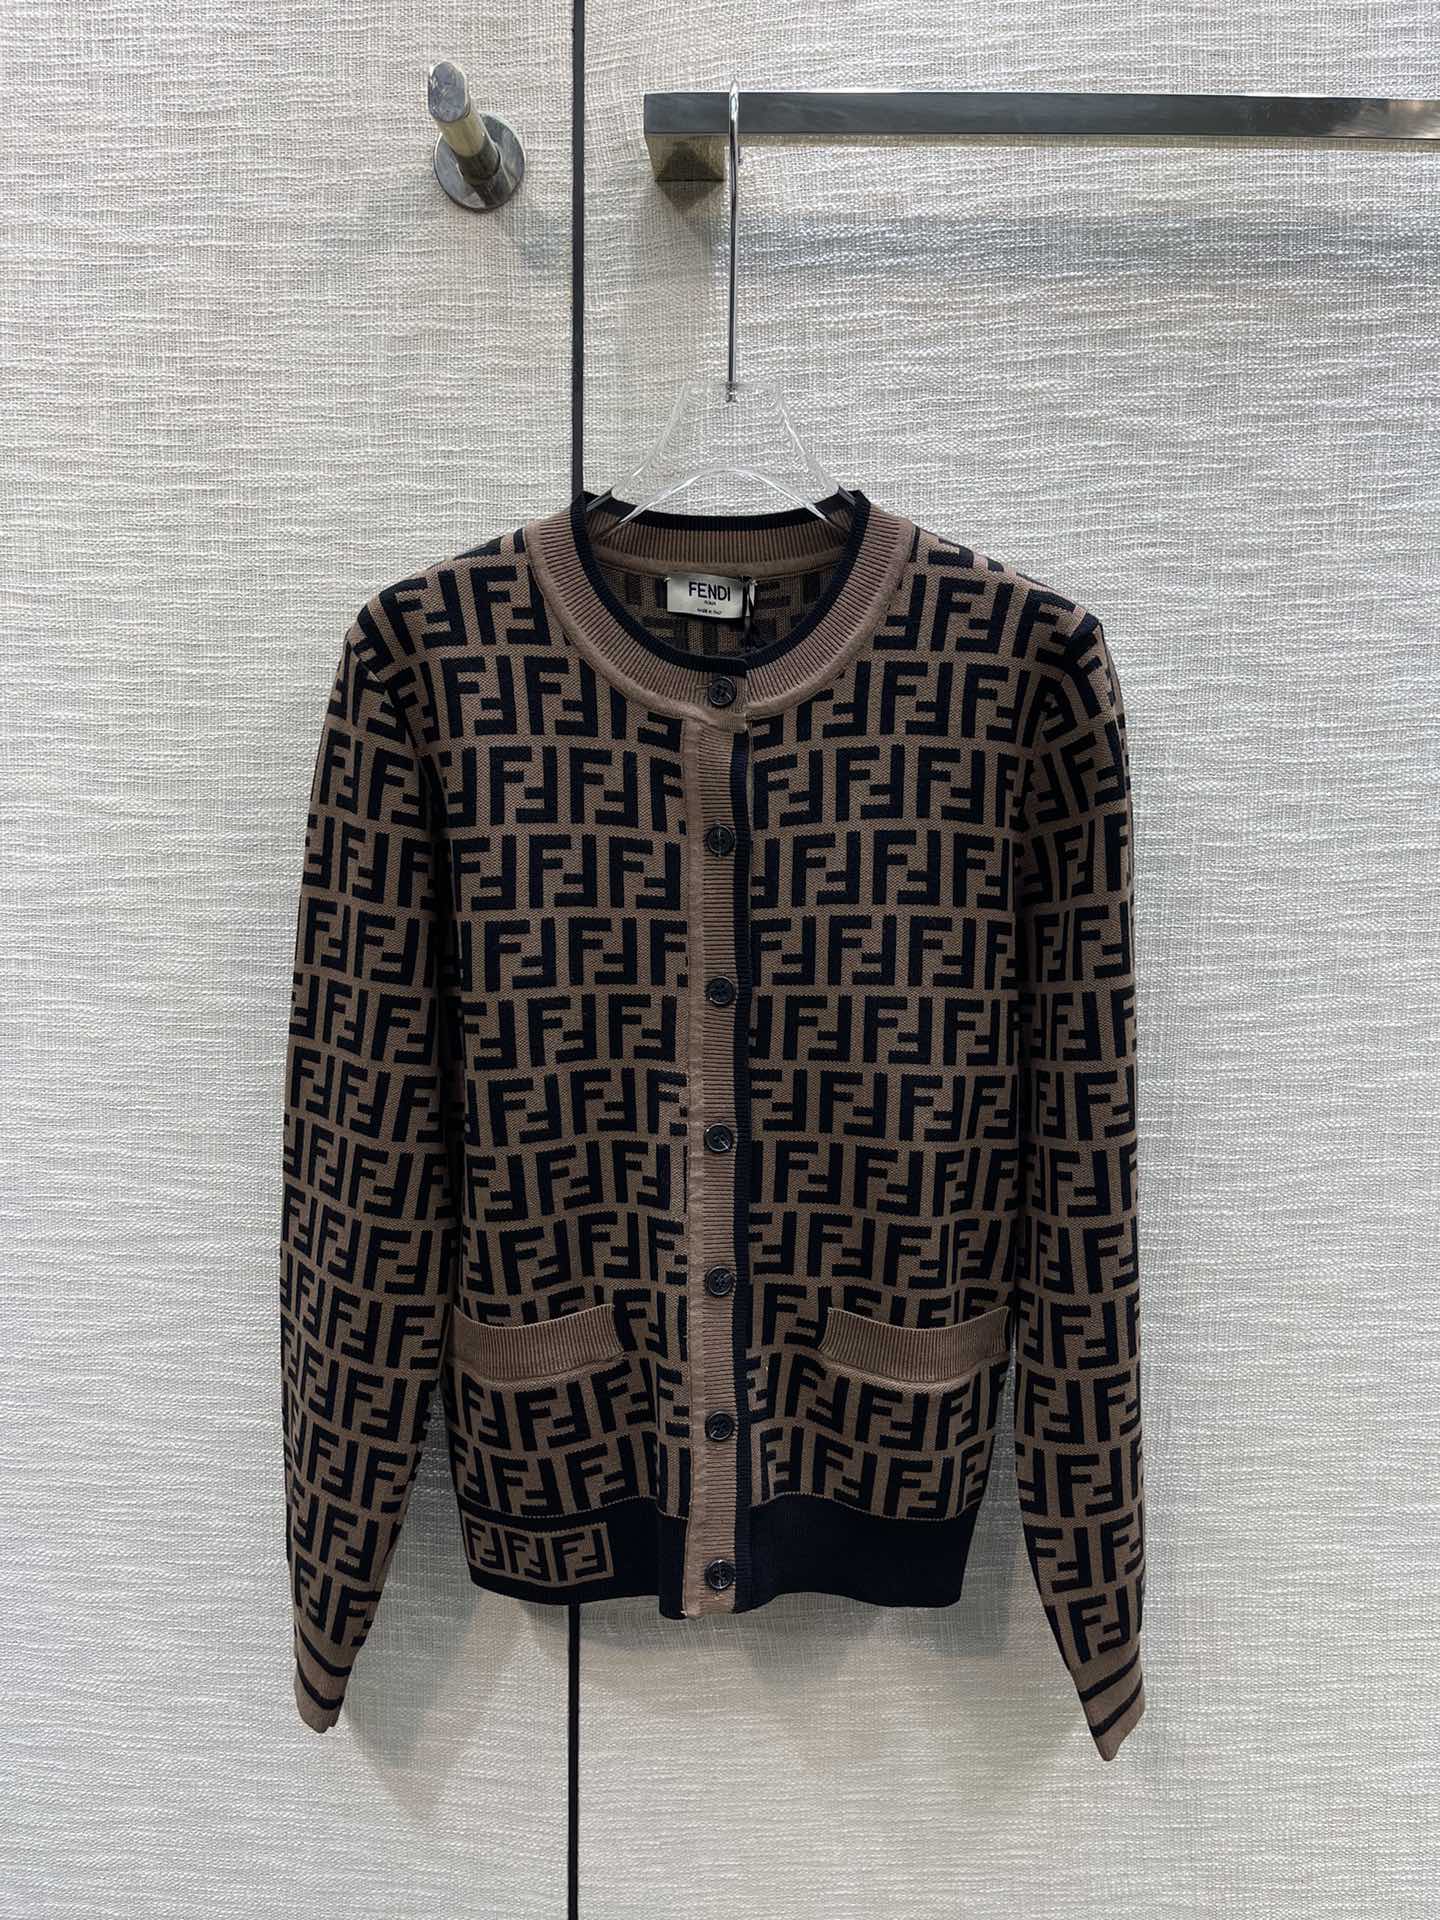 Fendi Luxury
 Clothing Cardigans Knit Sweater Knitting Fall/Winter Collection